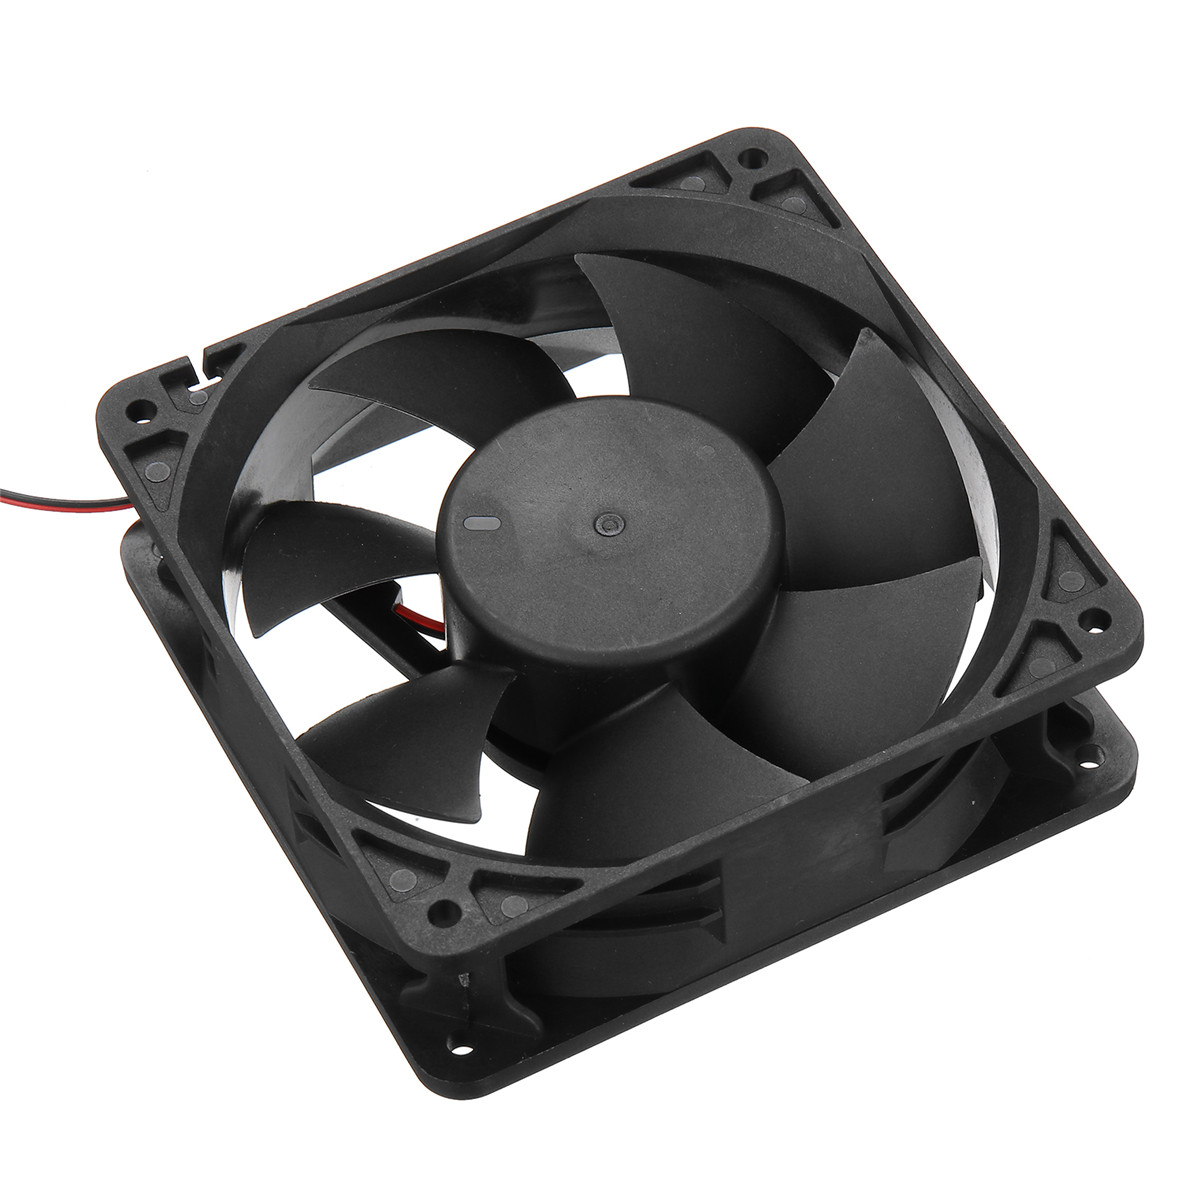 Find 120mm CPU Fan Big 4 Pin 12V Ball Bearing Silent Computer Case Cooling Fan Chassis Cooling CPU Heatsink Cooler for Sale on Gipsybee.com with cryptocurrencies